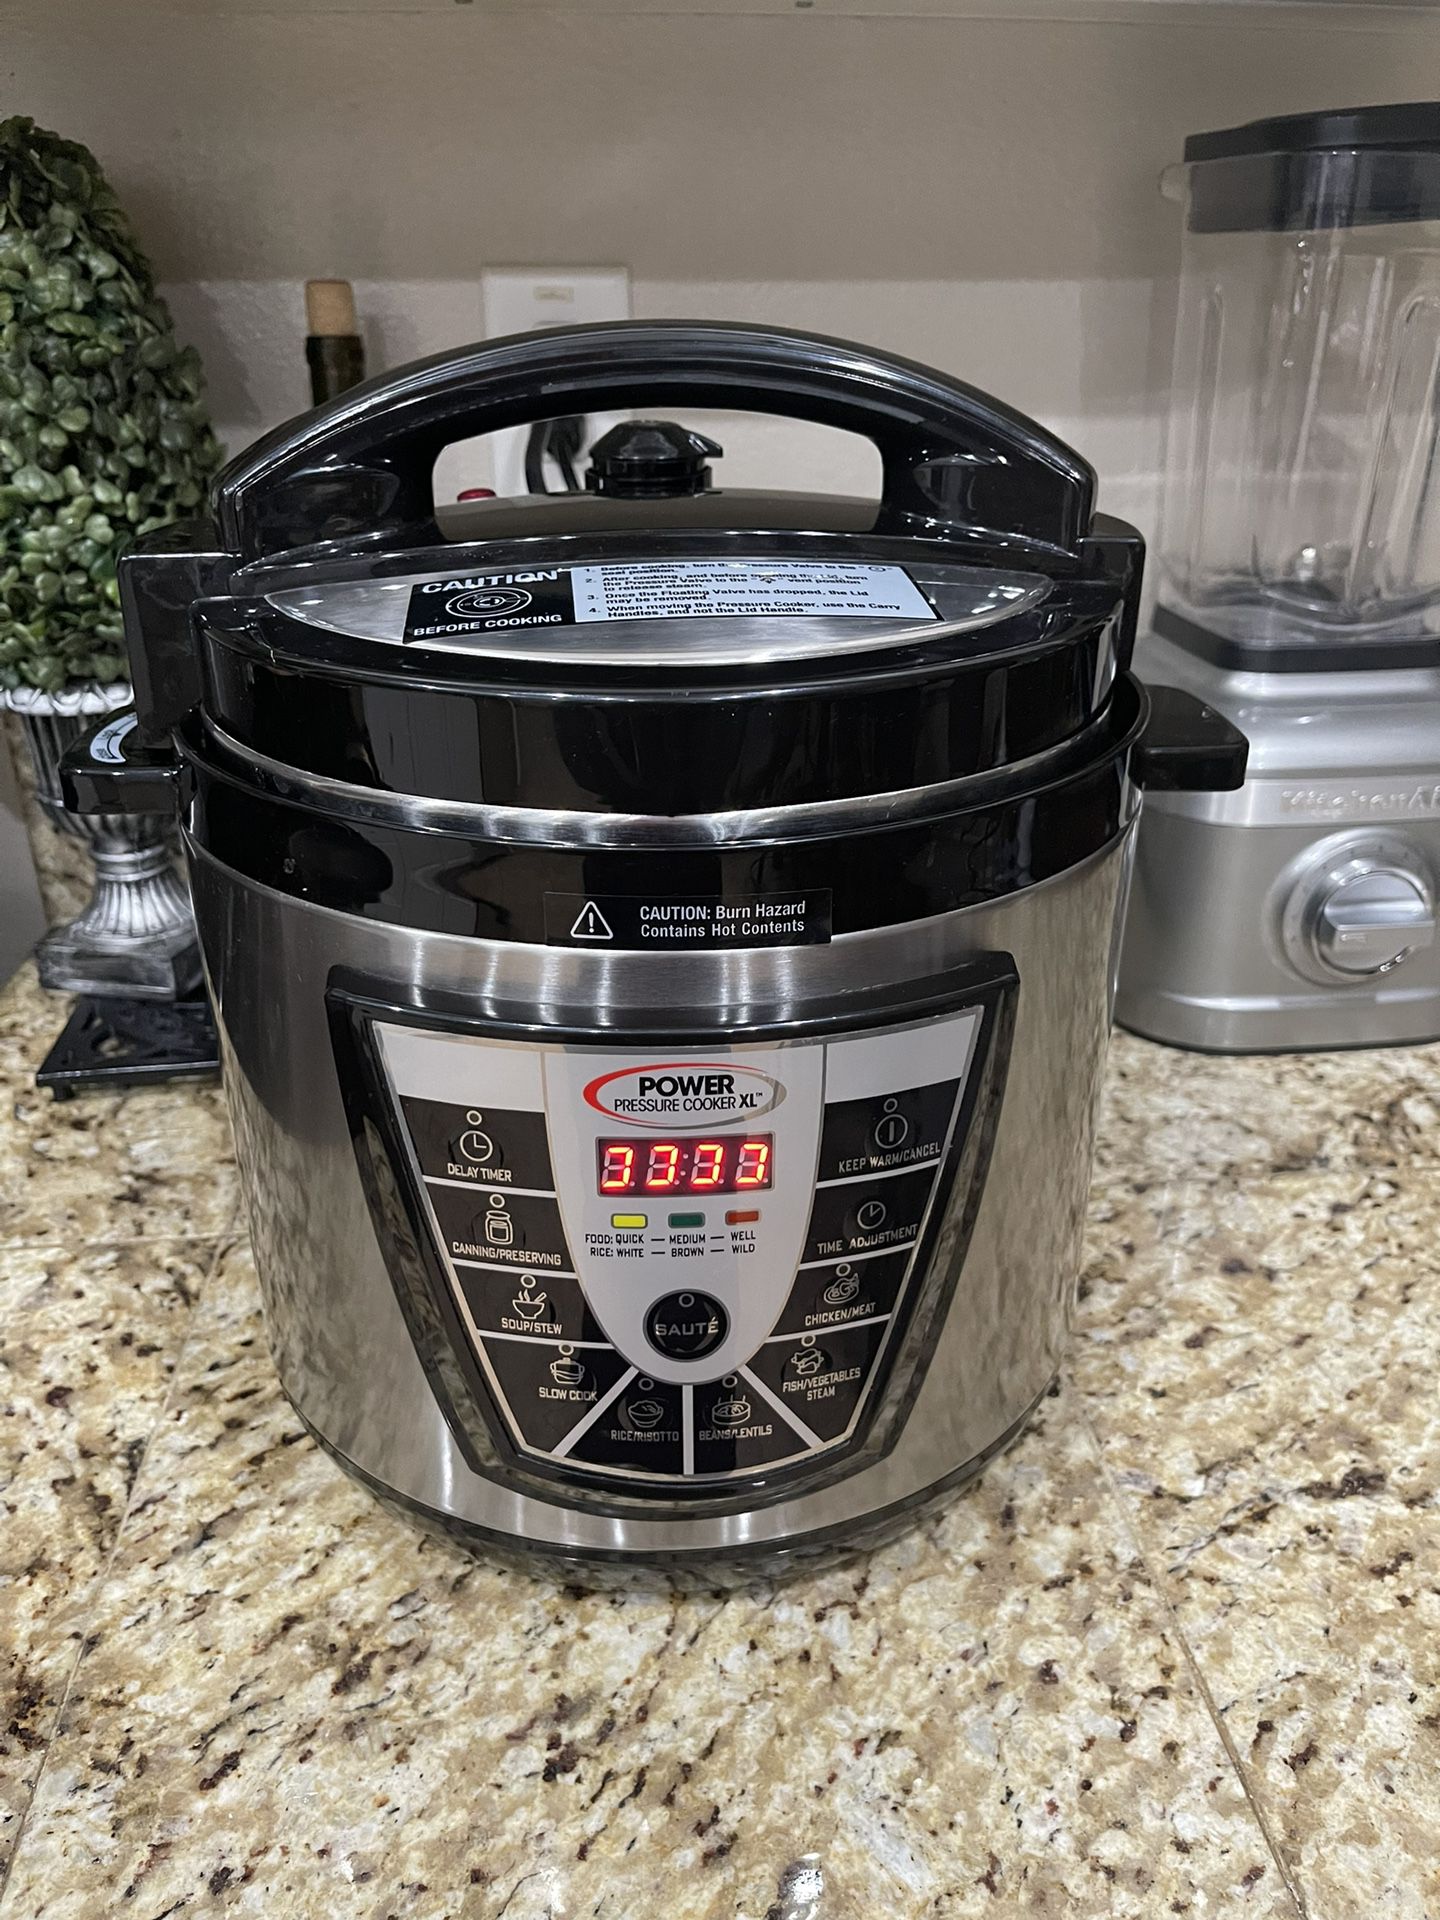 Power Pressure Cooker XL Manual: Learn How to Use It Safely and